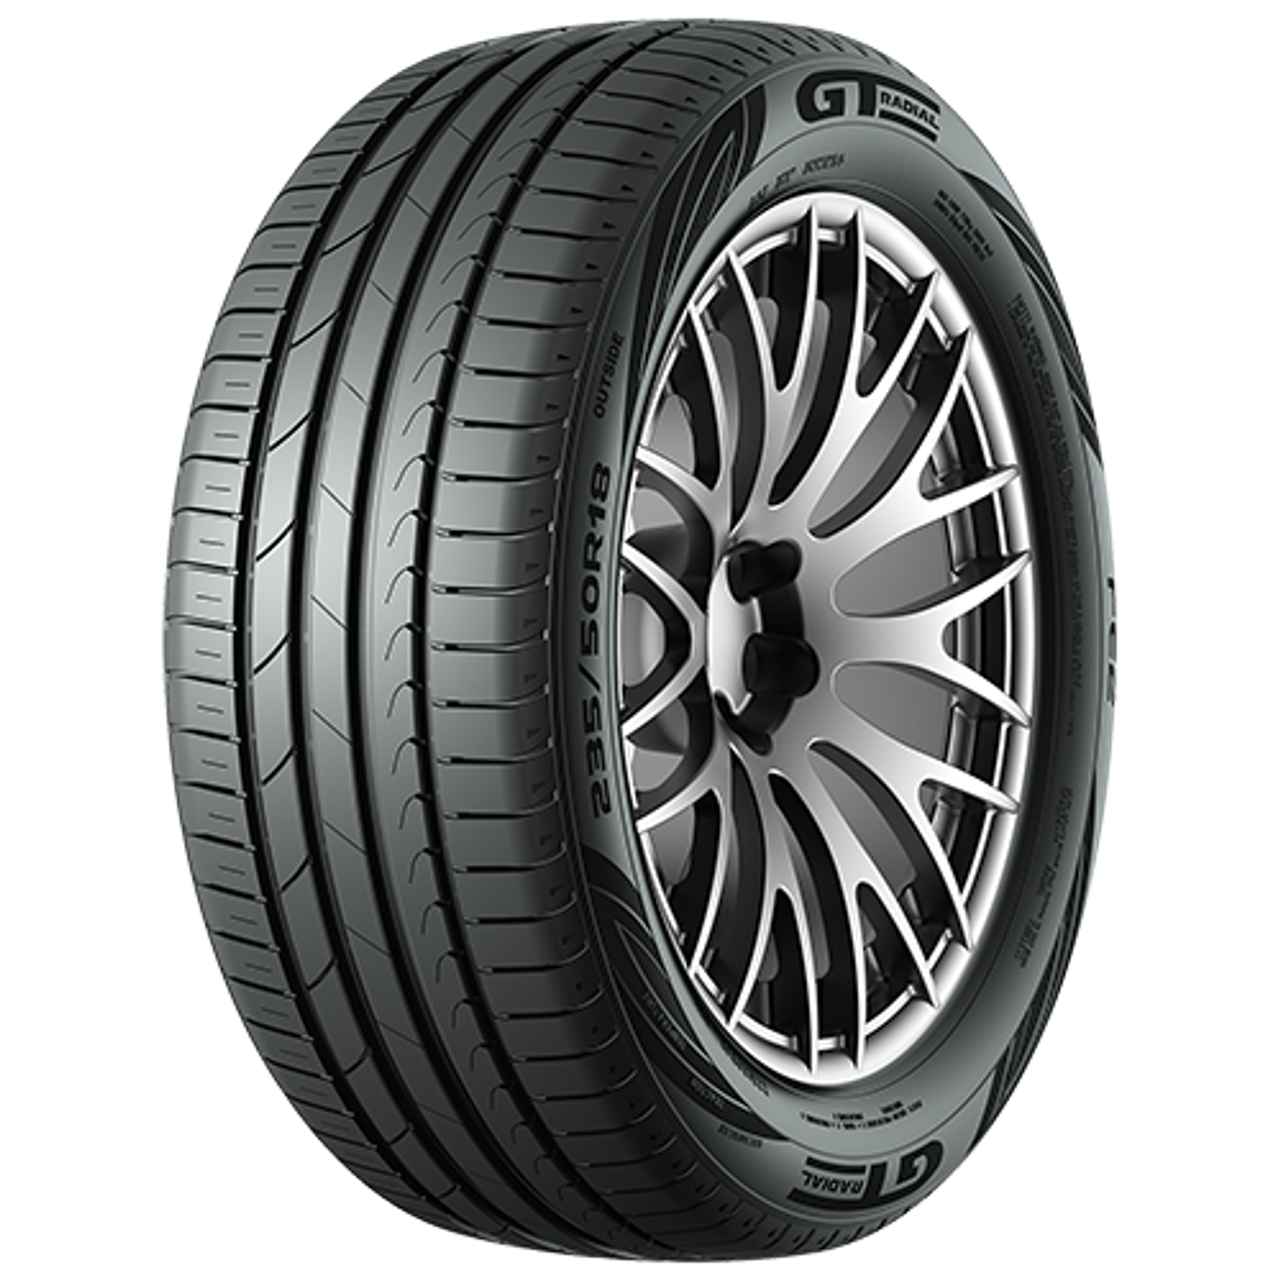 GT-RADIAL FE2 175/65R15 88H BSW